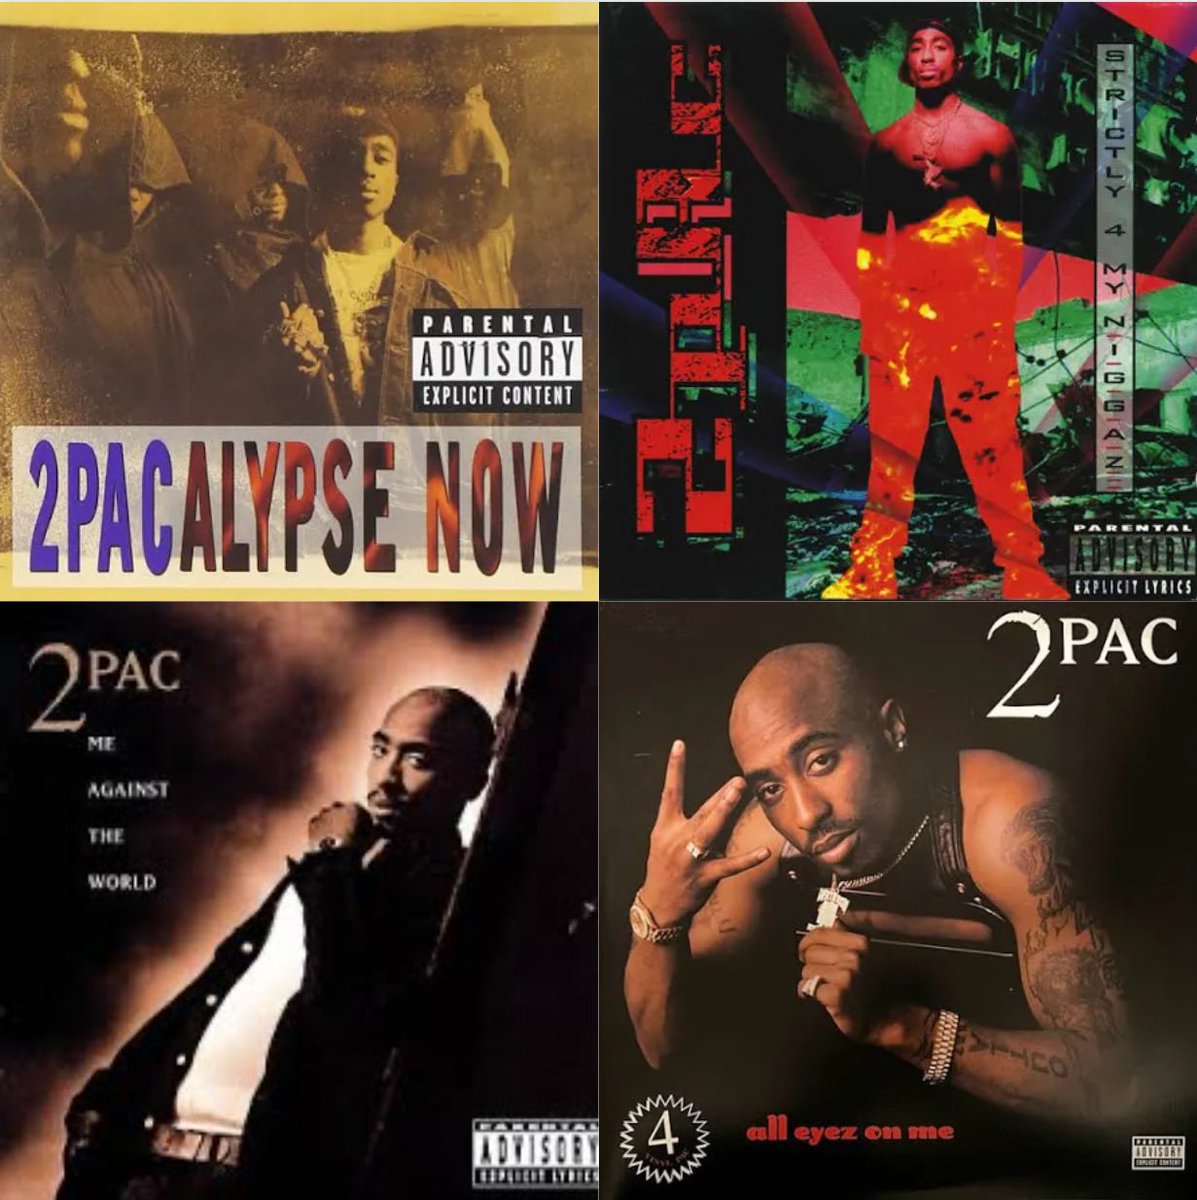 Which one is the best?

#RememberTheRecord #Tupac #2PacalypseNow #Podcasts #fyp #fy  #viral #DearMama #2Pac #MeAgainstTheWorld #AllEyezOnMe #AfeniShakur #Strictly4My #TheRappersCorner #DeathrowRecords #90sHipHop #WestCoastHipHop